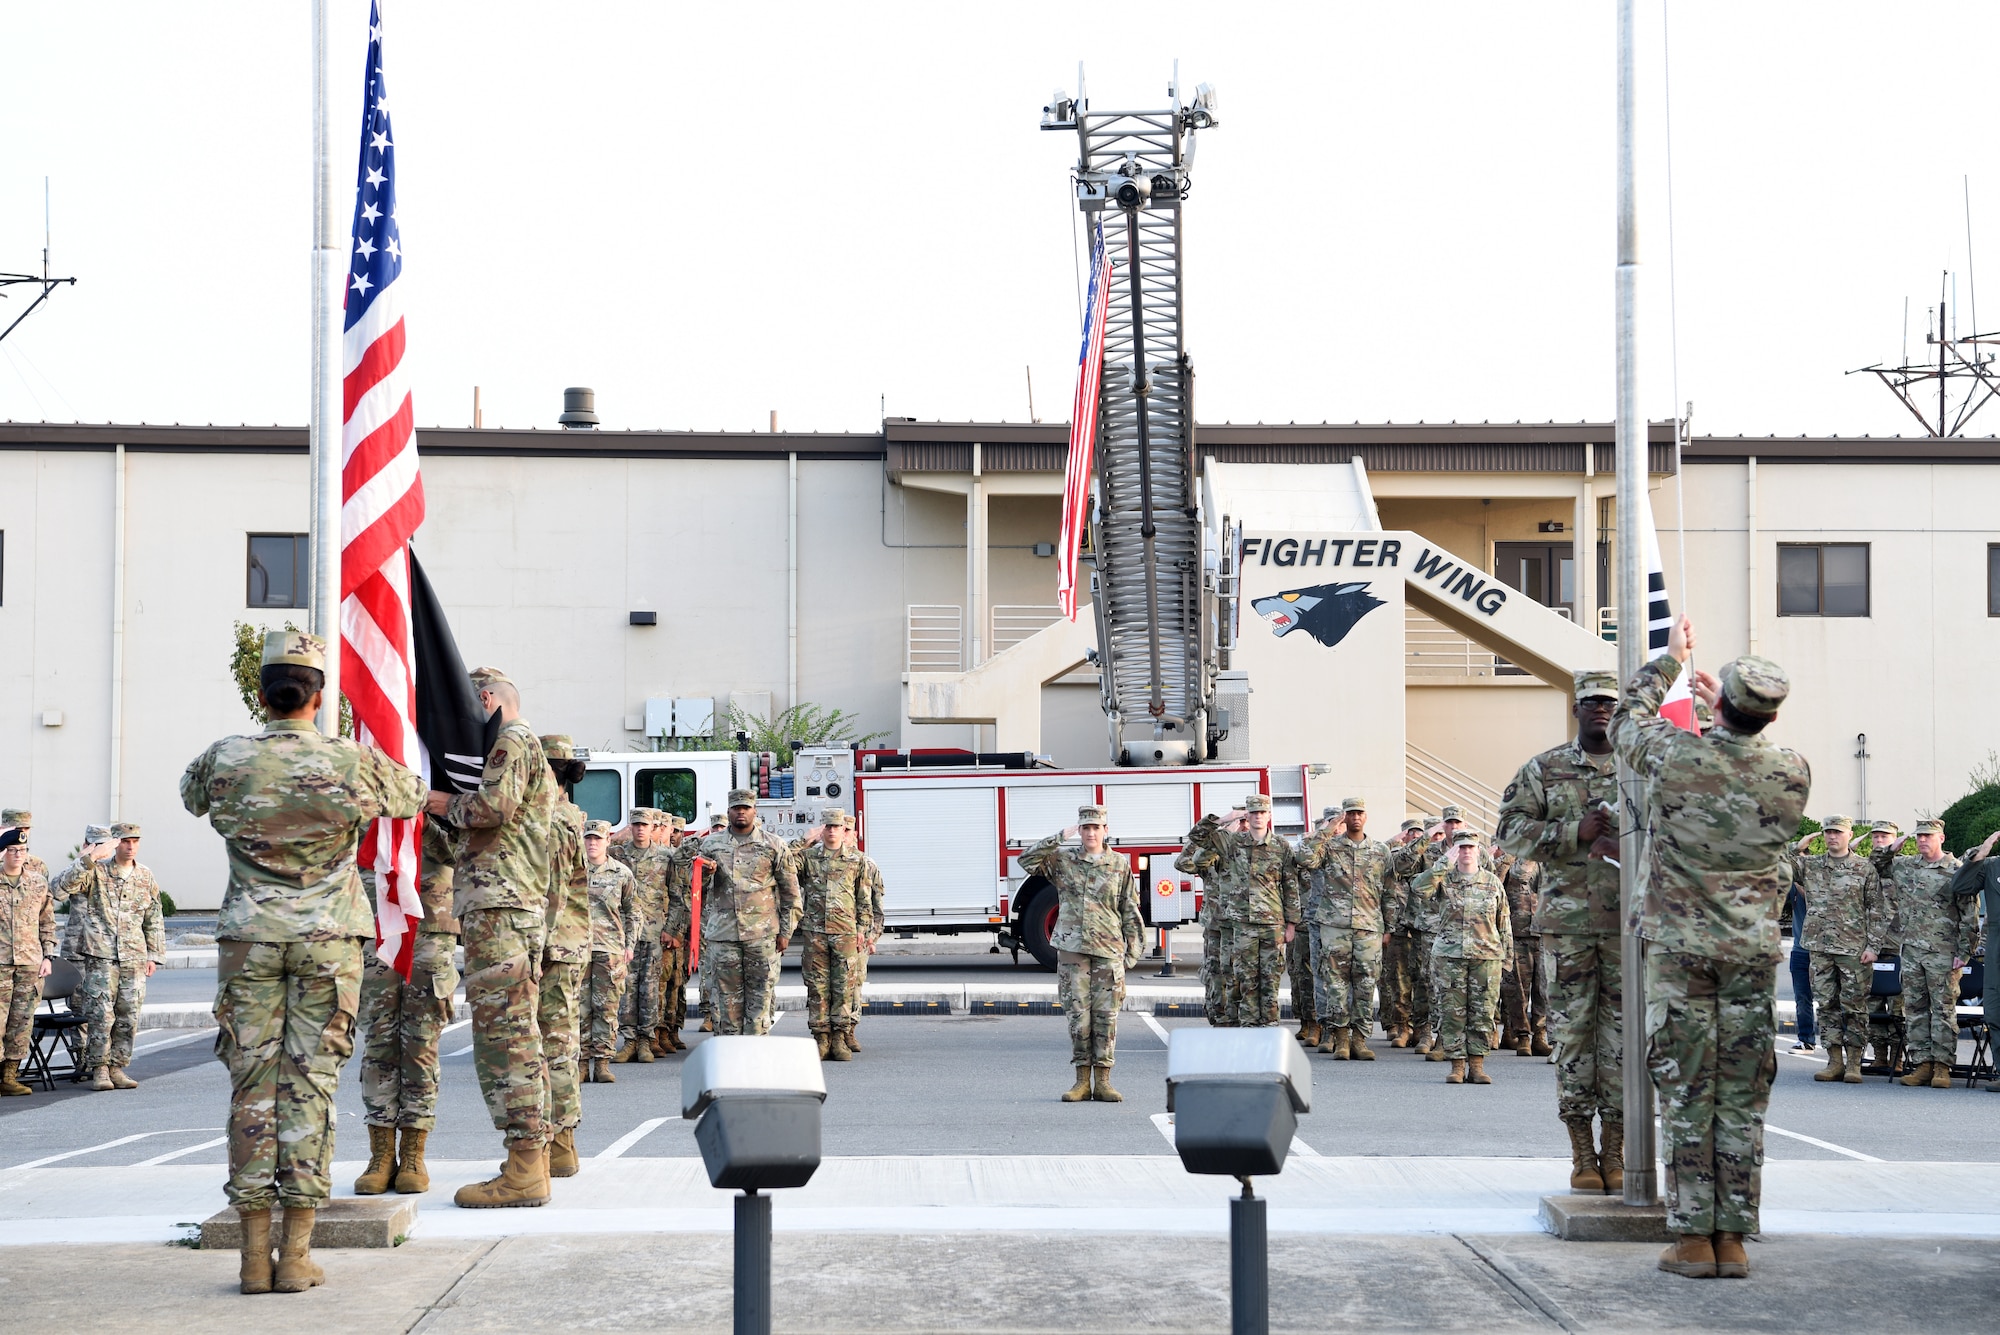 Members of the 8th Fighter Wing Honor Guard raise the American flag with the prisoners of war and missing in action flag as well as the Republic of Korea flag during the POW/MIA opening ceremony at Kunsan Air Base, Republic of Korea, Sept. 16, 2019. The 8th Fighter Wing hosted events during the week of Sept. 16 to 20, finishing with a retreat ceremony on National POW/MIA Day, Sept. 20. (U.S. Air Force photo by Staff Sgt. Joshua Edwards)